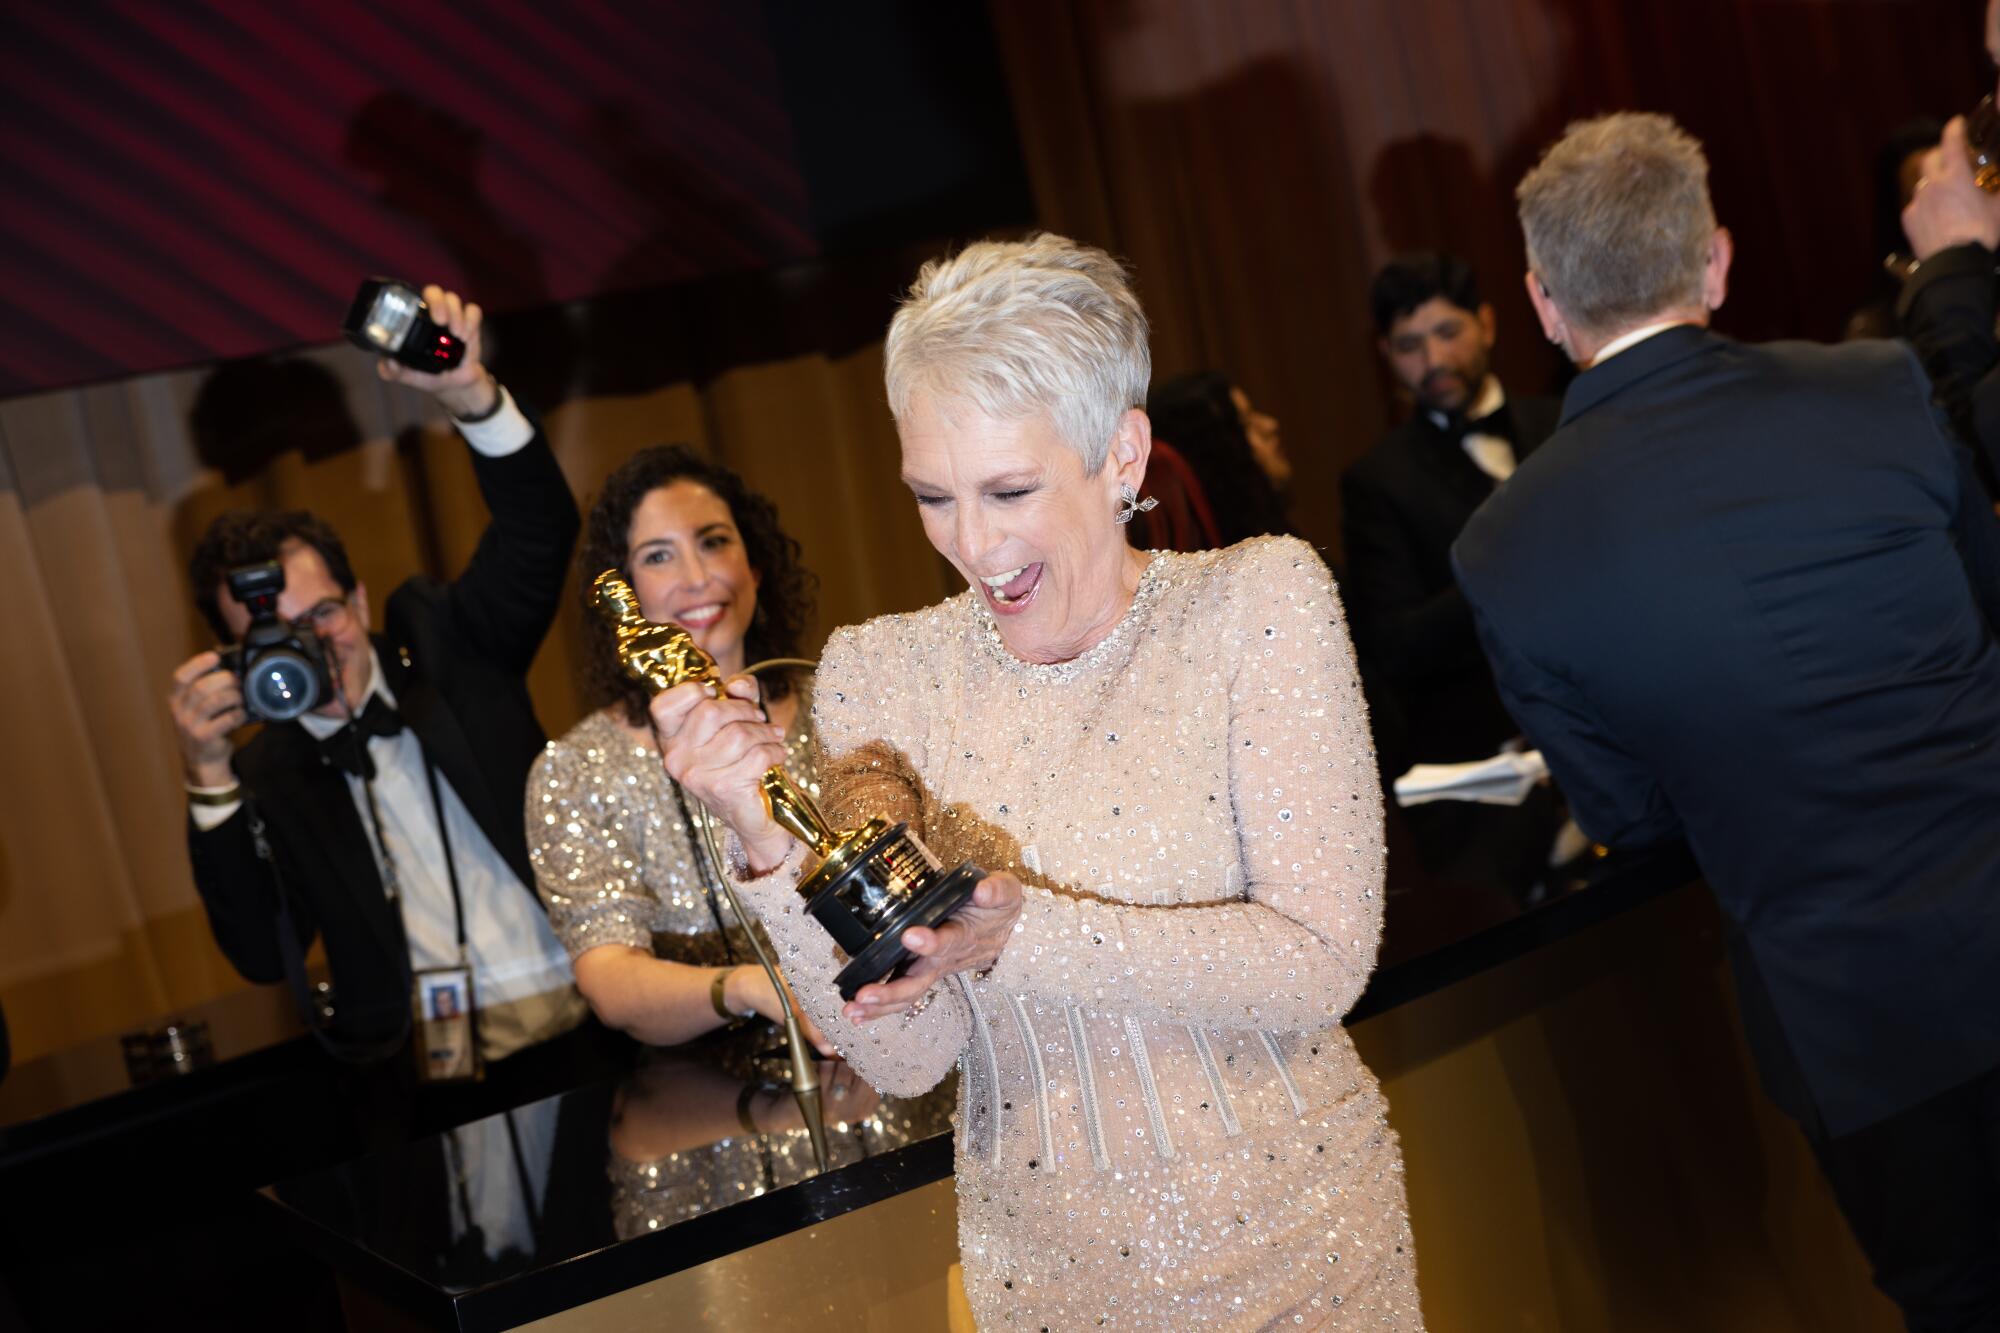 Jamie Lee Curtis smiles broadly at her just-engraved Oscar statuette.